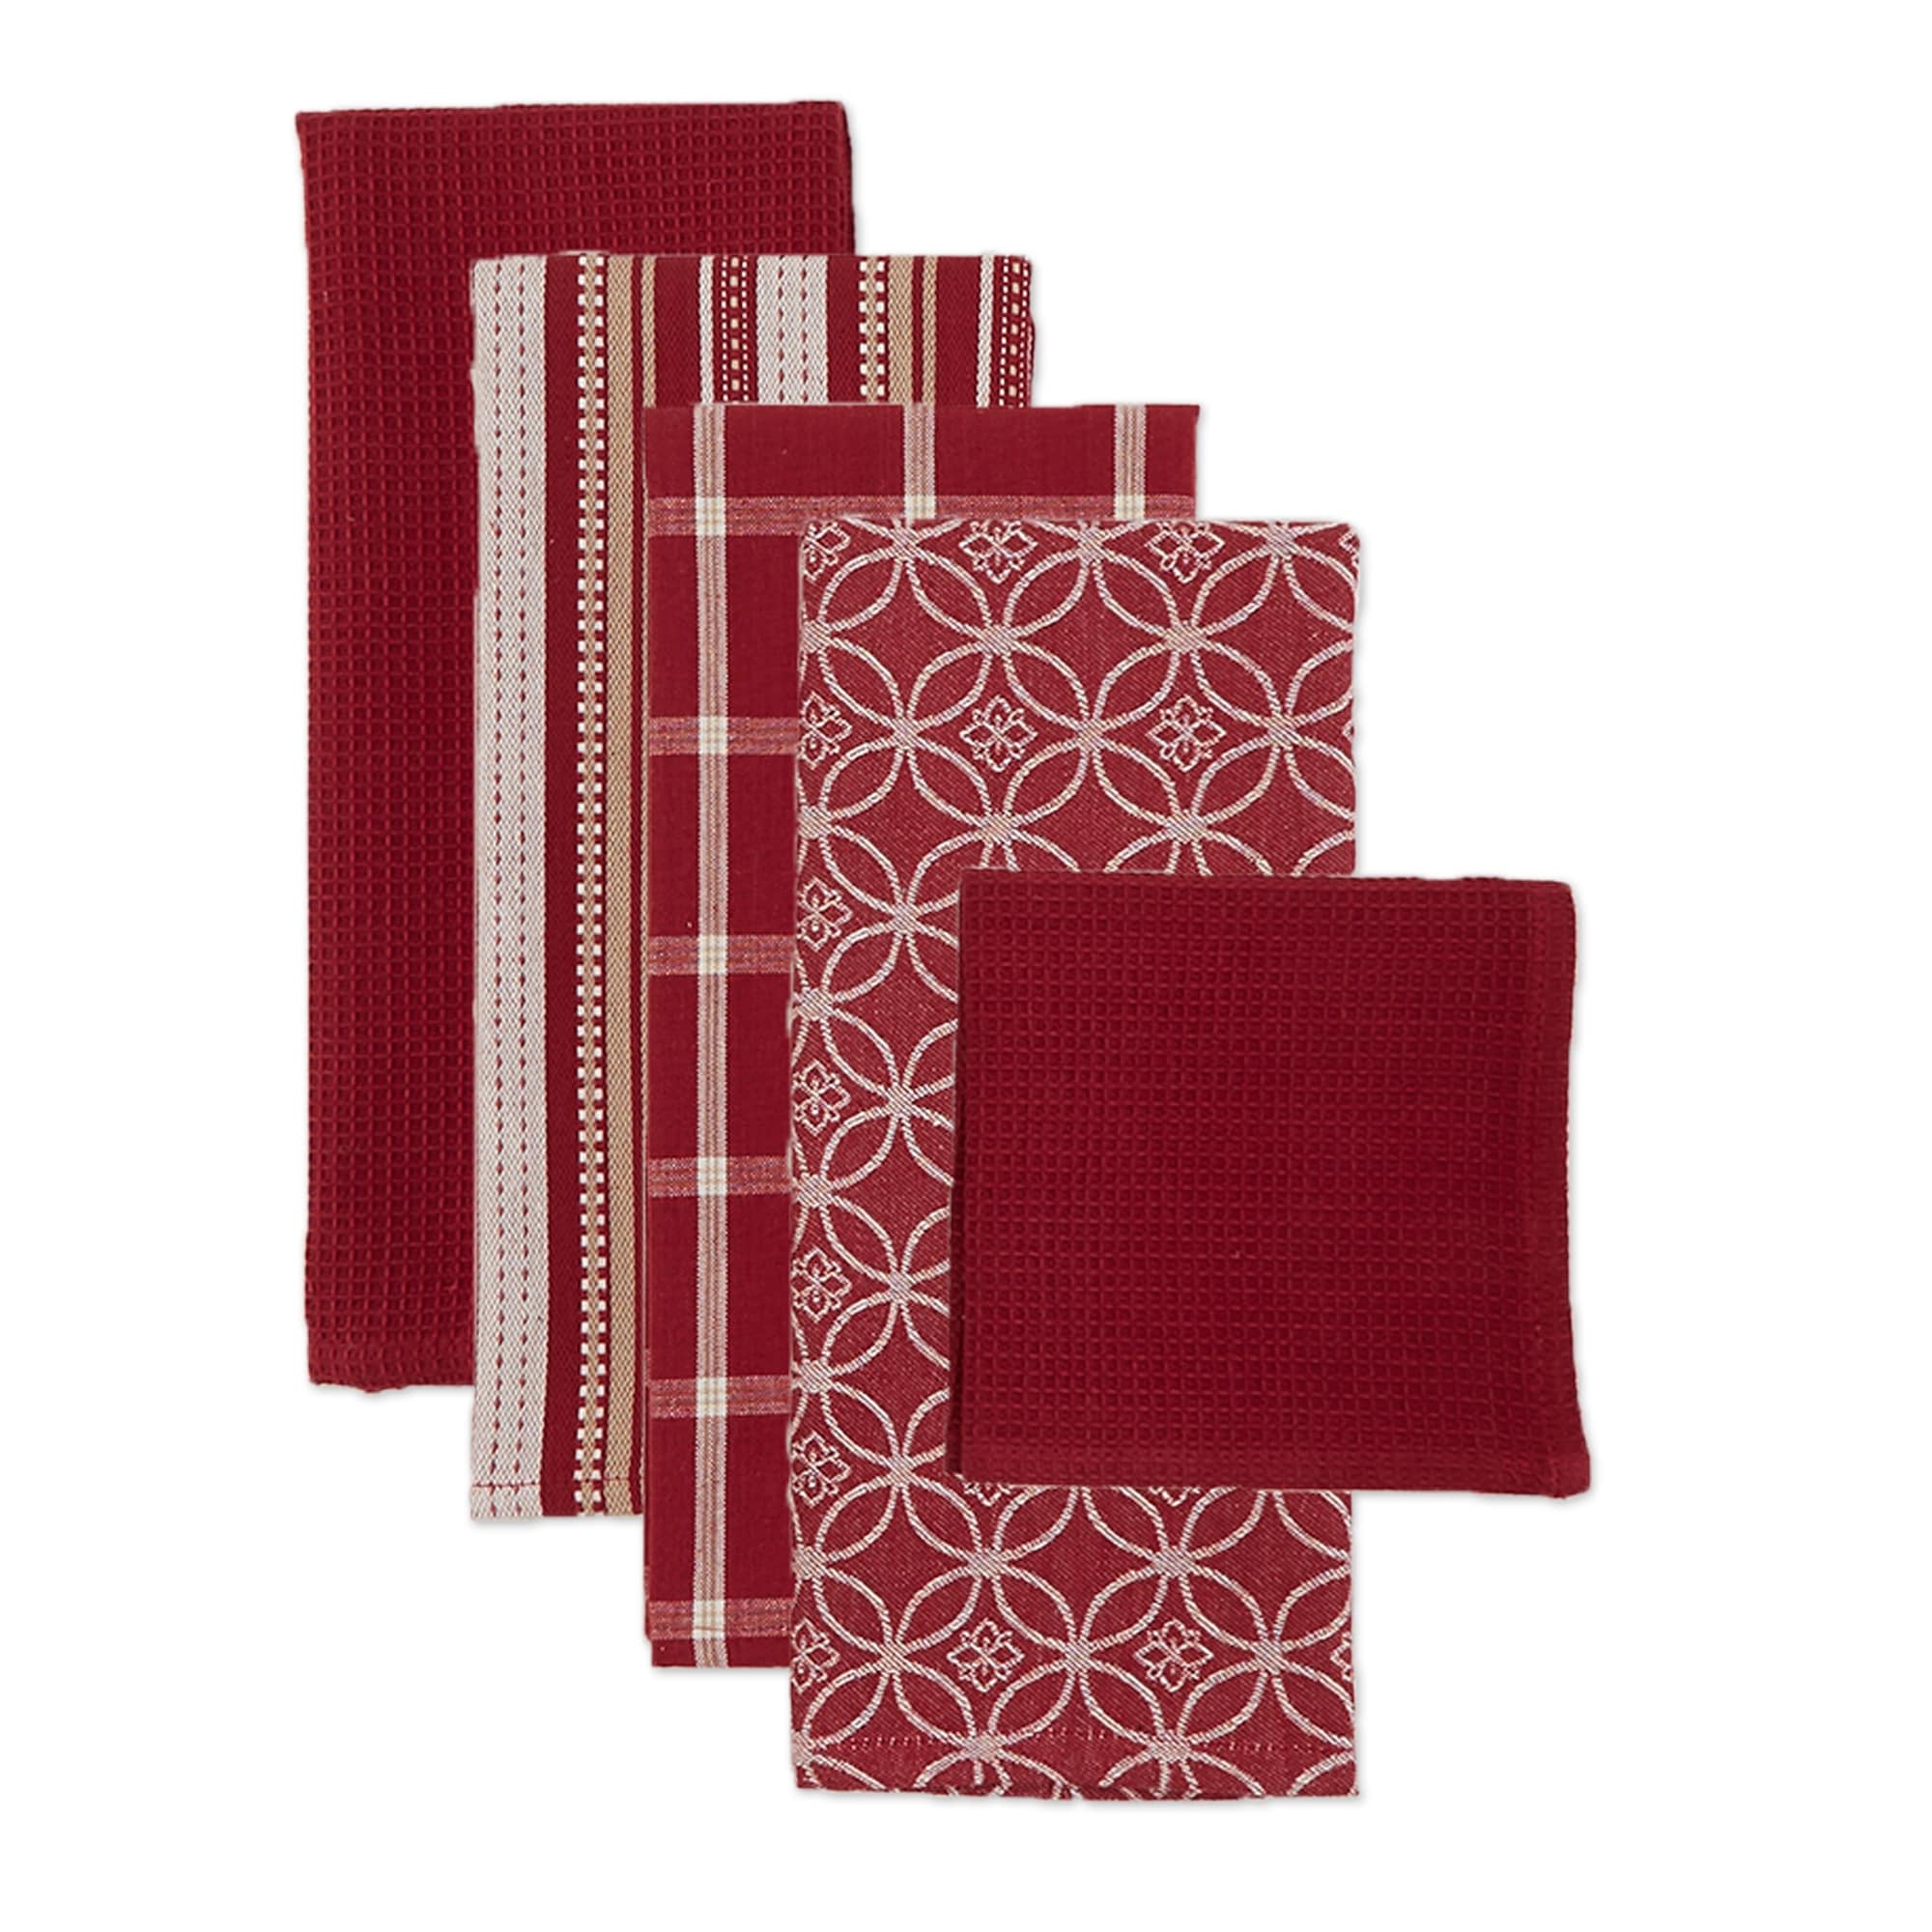 youcoulee Kitchen Towels and Dishcloths Sets, 12 Packs Dish Towels,  Honeycomb Design Dish Cloths Perfect for Kitchen Messes and Drying Dishes,  12 x 12Inches, Pi…